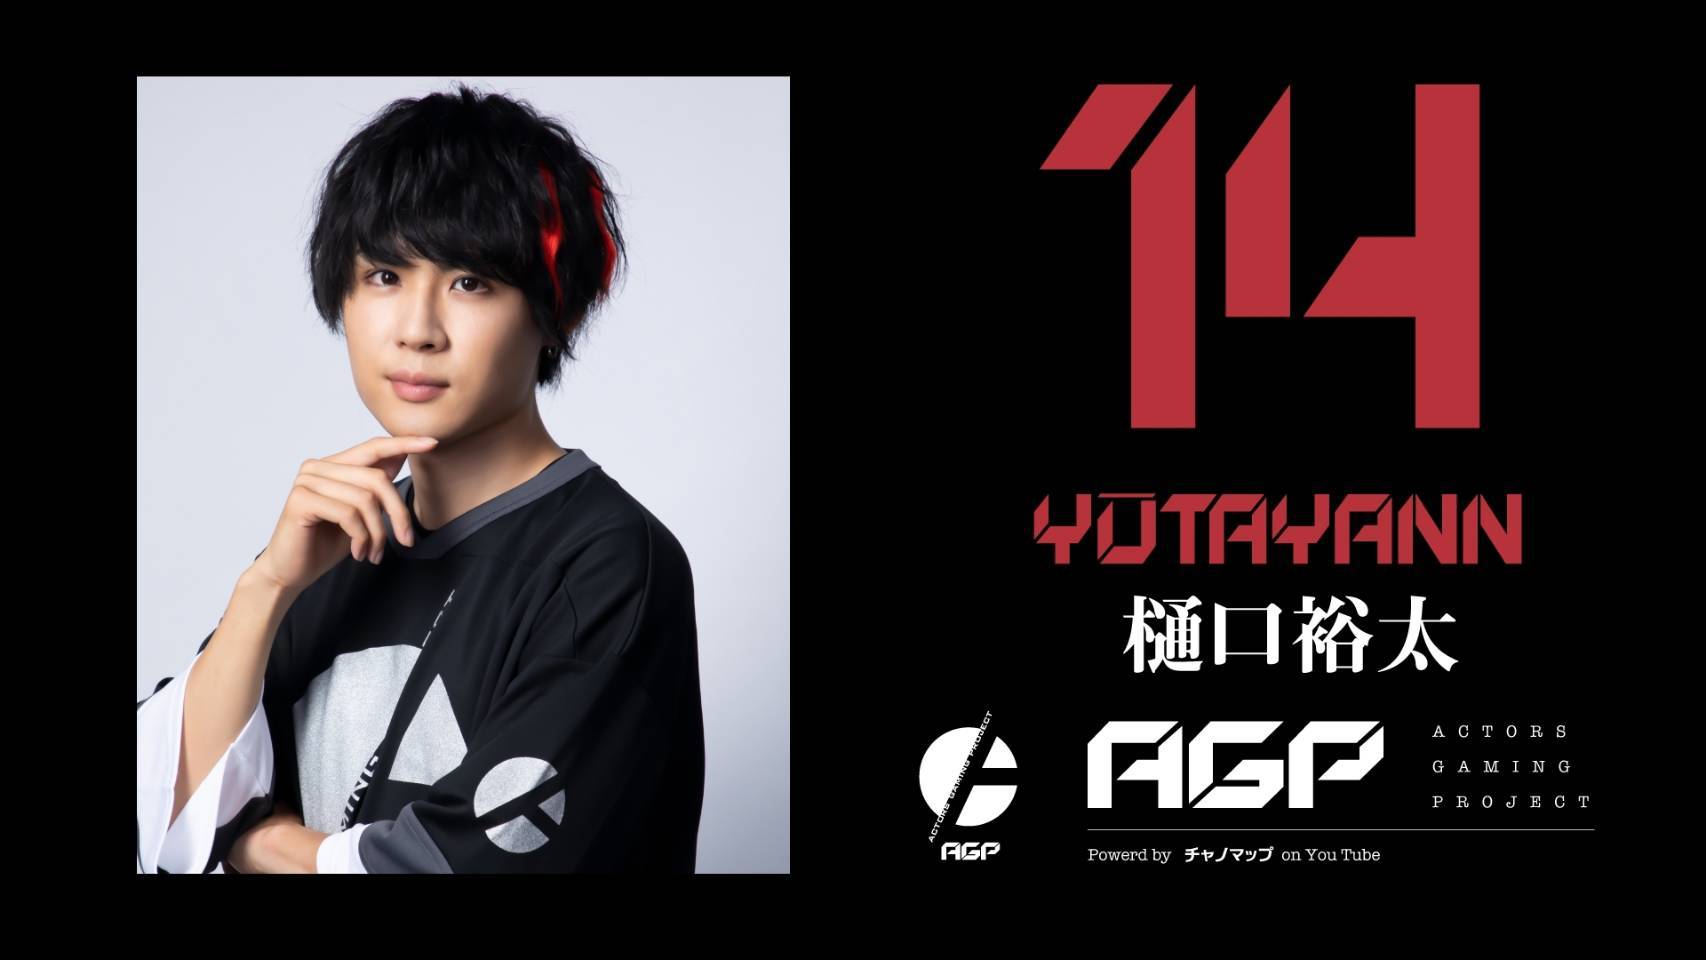 「ACTORS GAMING PROJECT」 14 樋口裕太